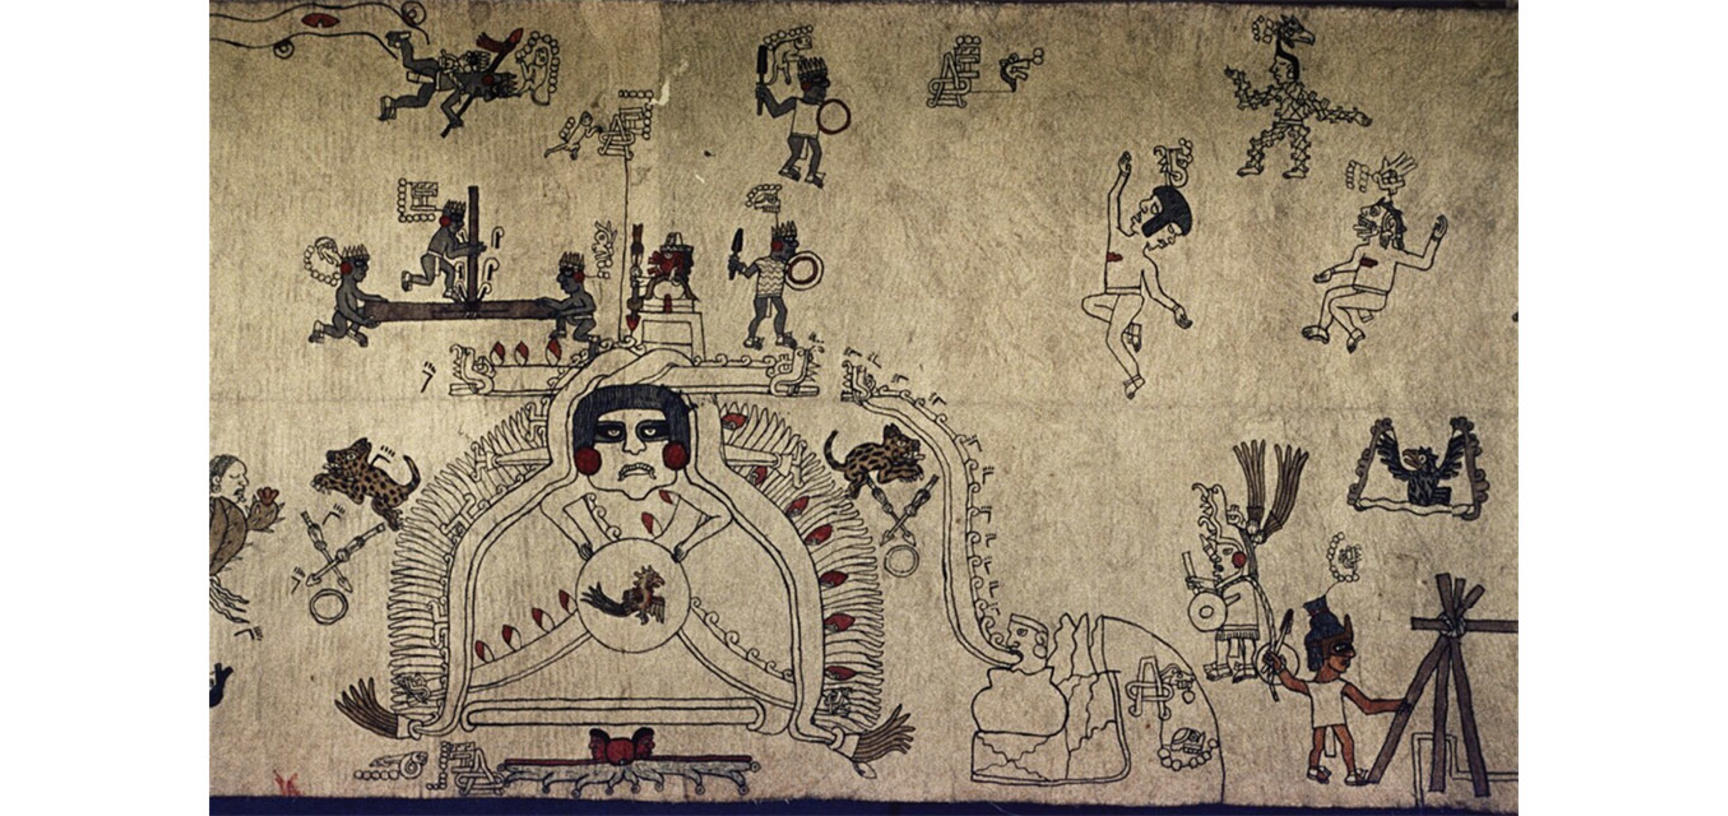 A depiction of an early Mesoamerican priest performing a human sacrifice